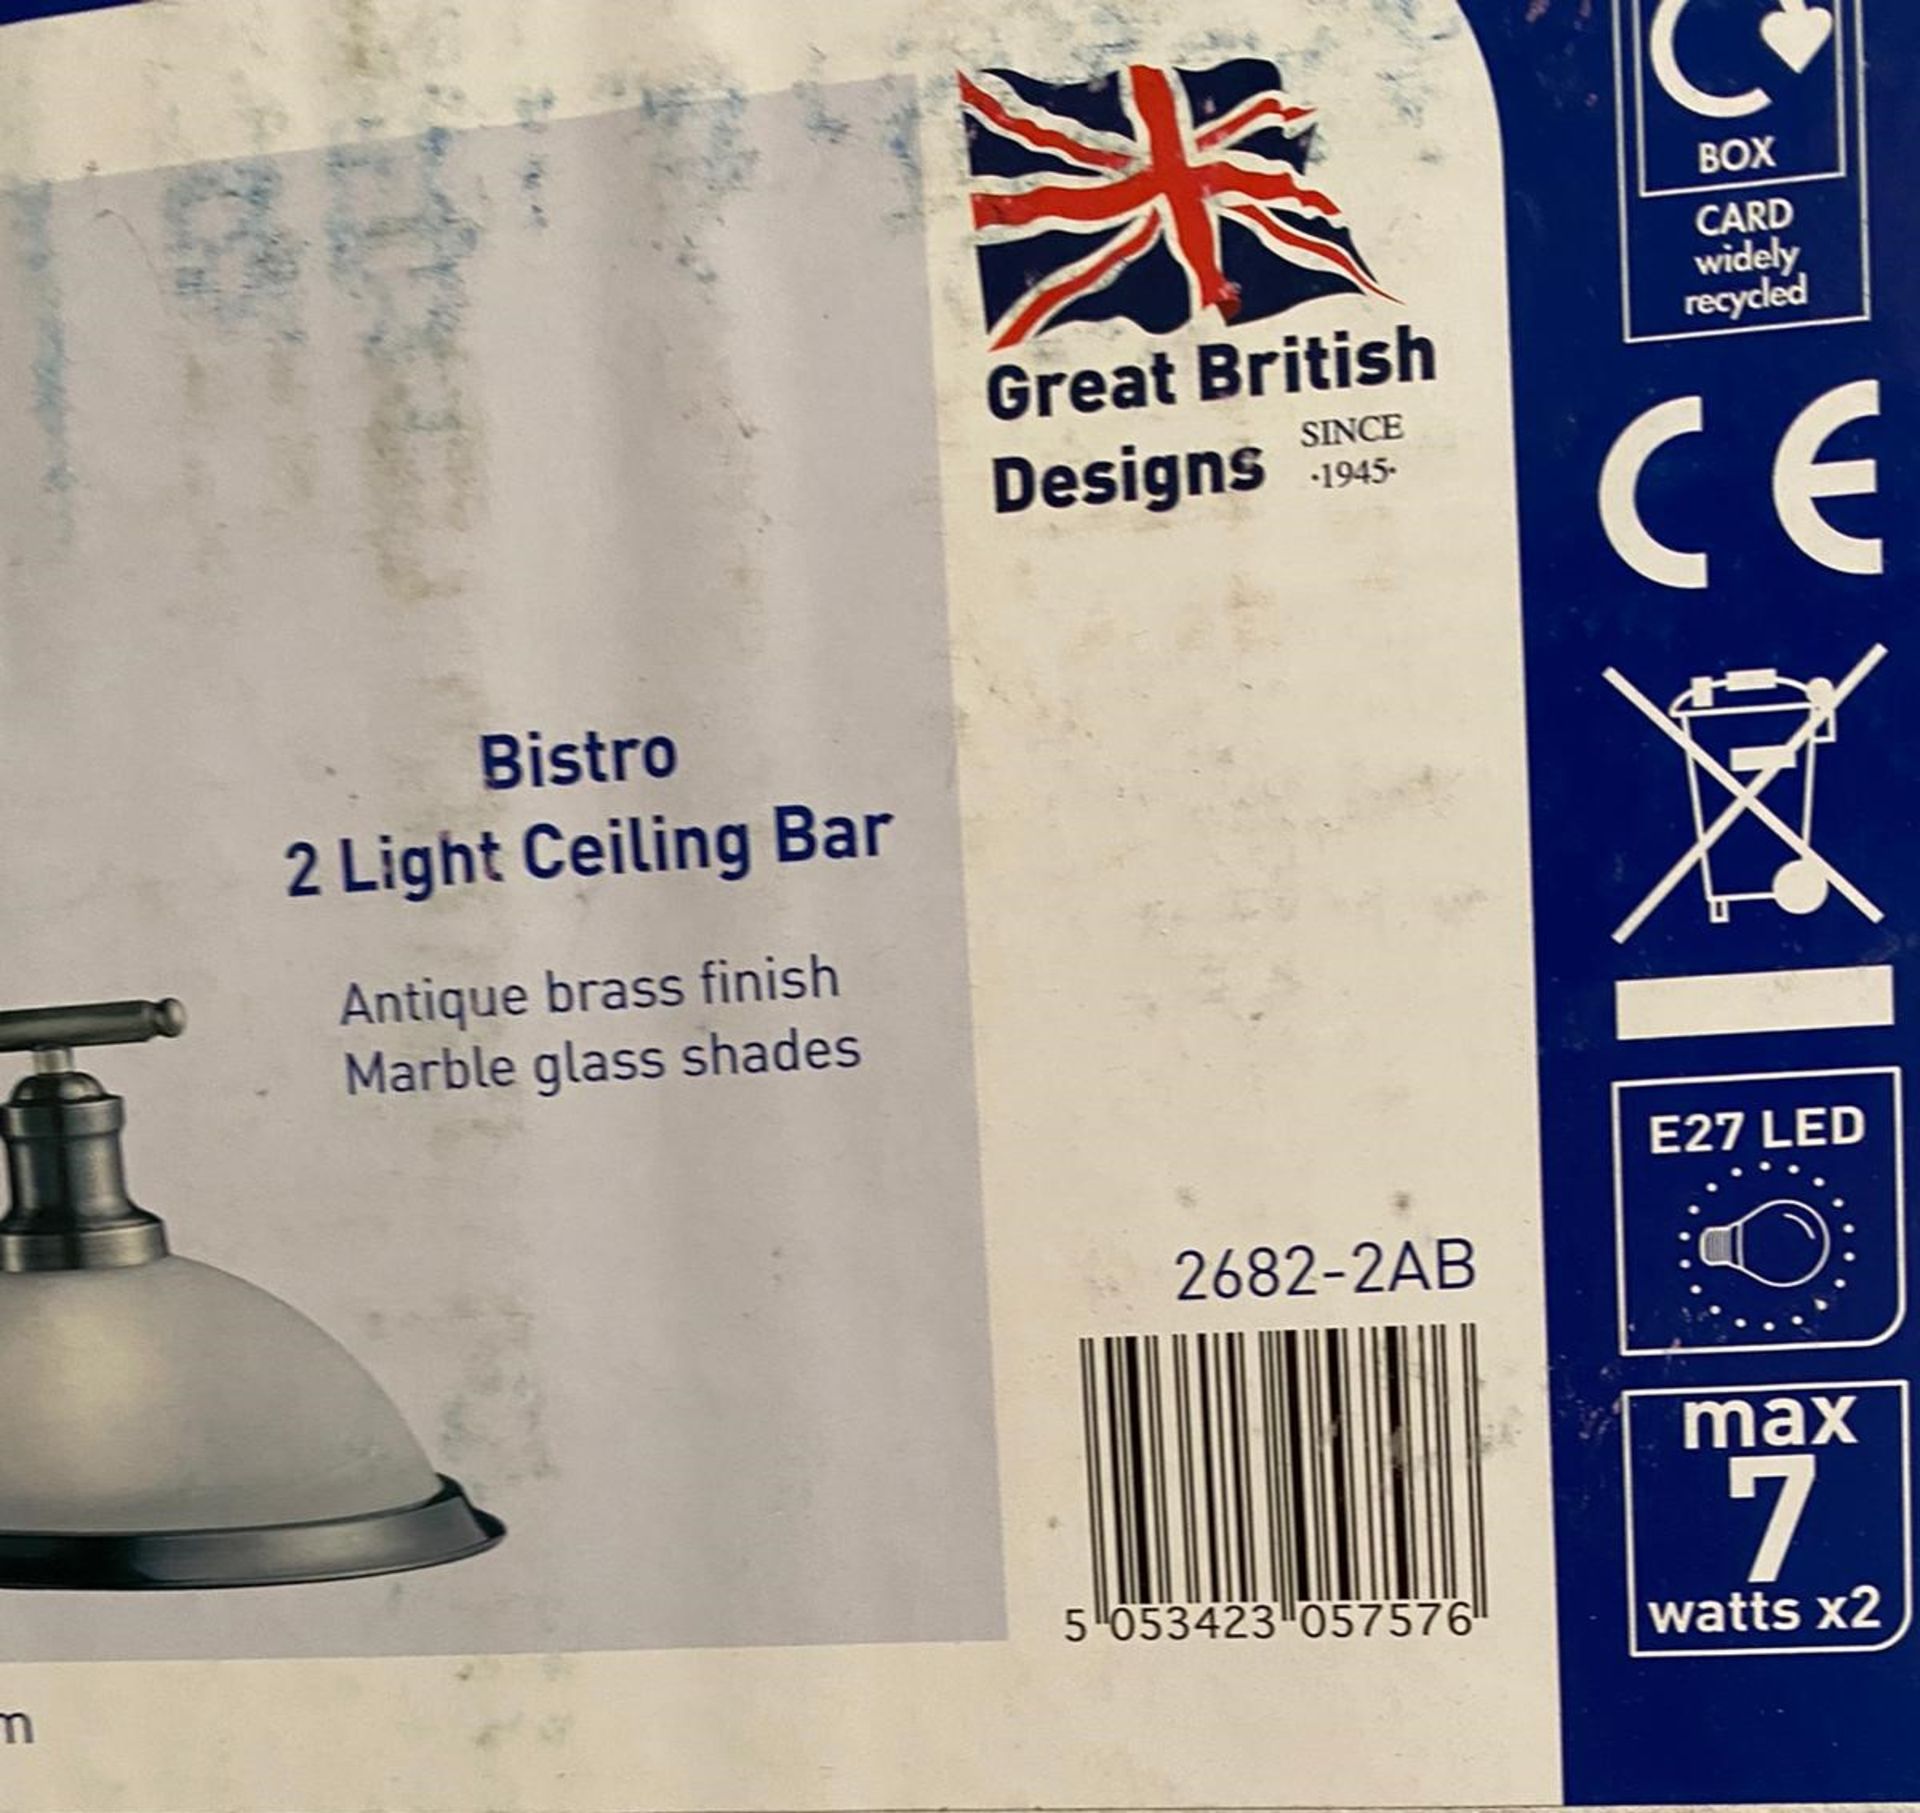 1 x Searchlight Bistro 2 Light Ceiling Bar - Ref: 2682-2AB - New and Boxed - RRP: £115.00 - Image 3 of 3